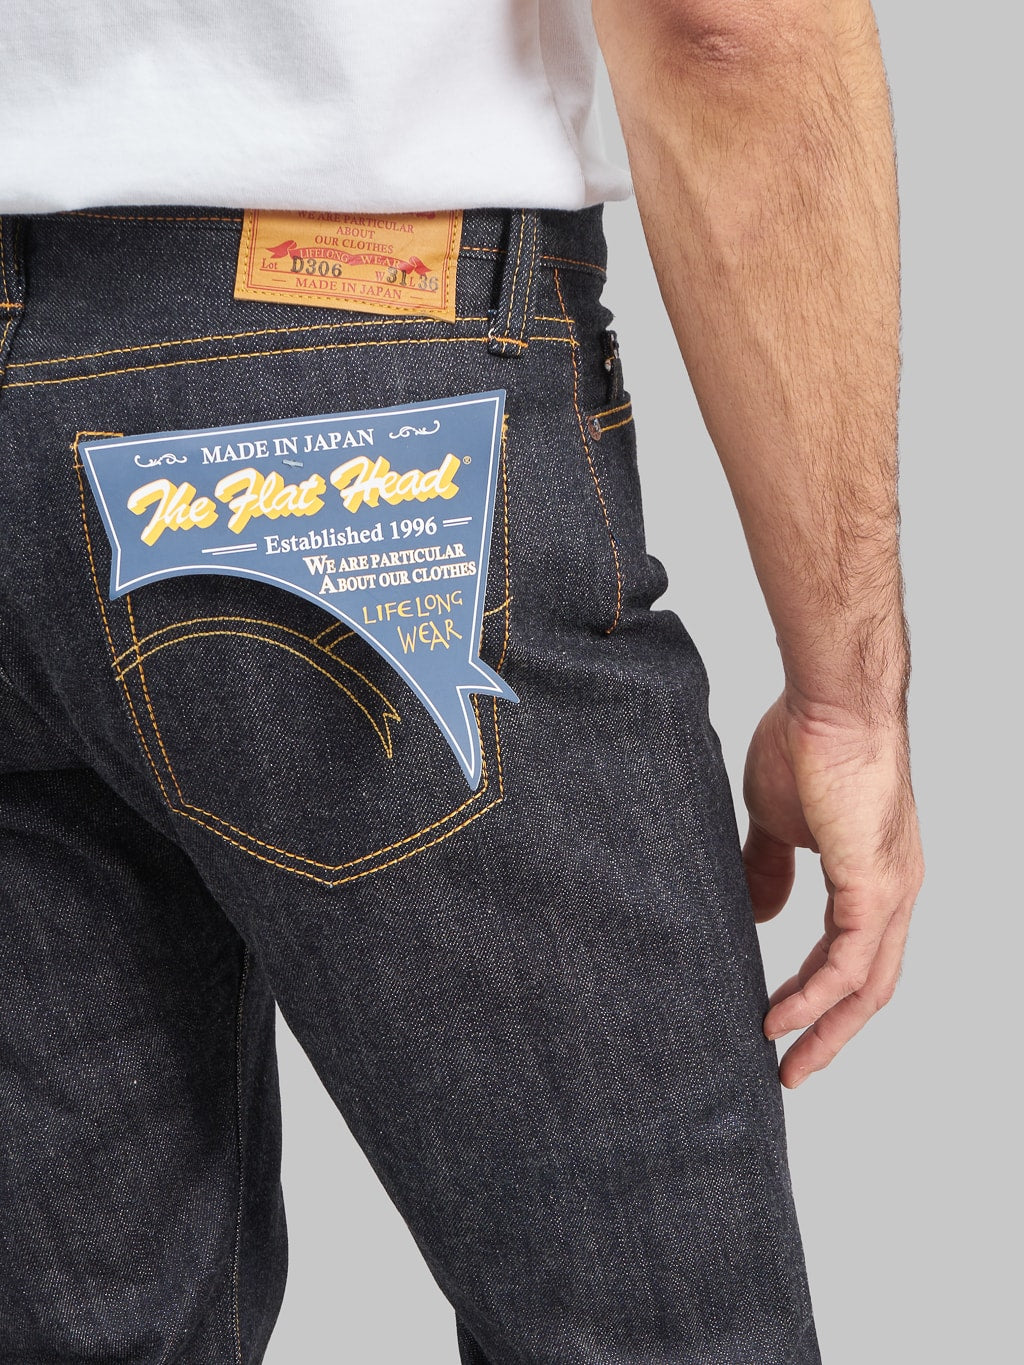 The Flat Head D306 Tight Tapered Jeans back pocket